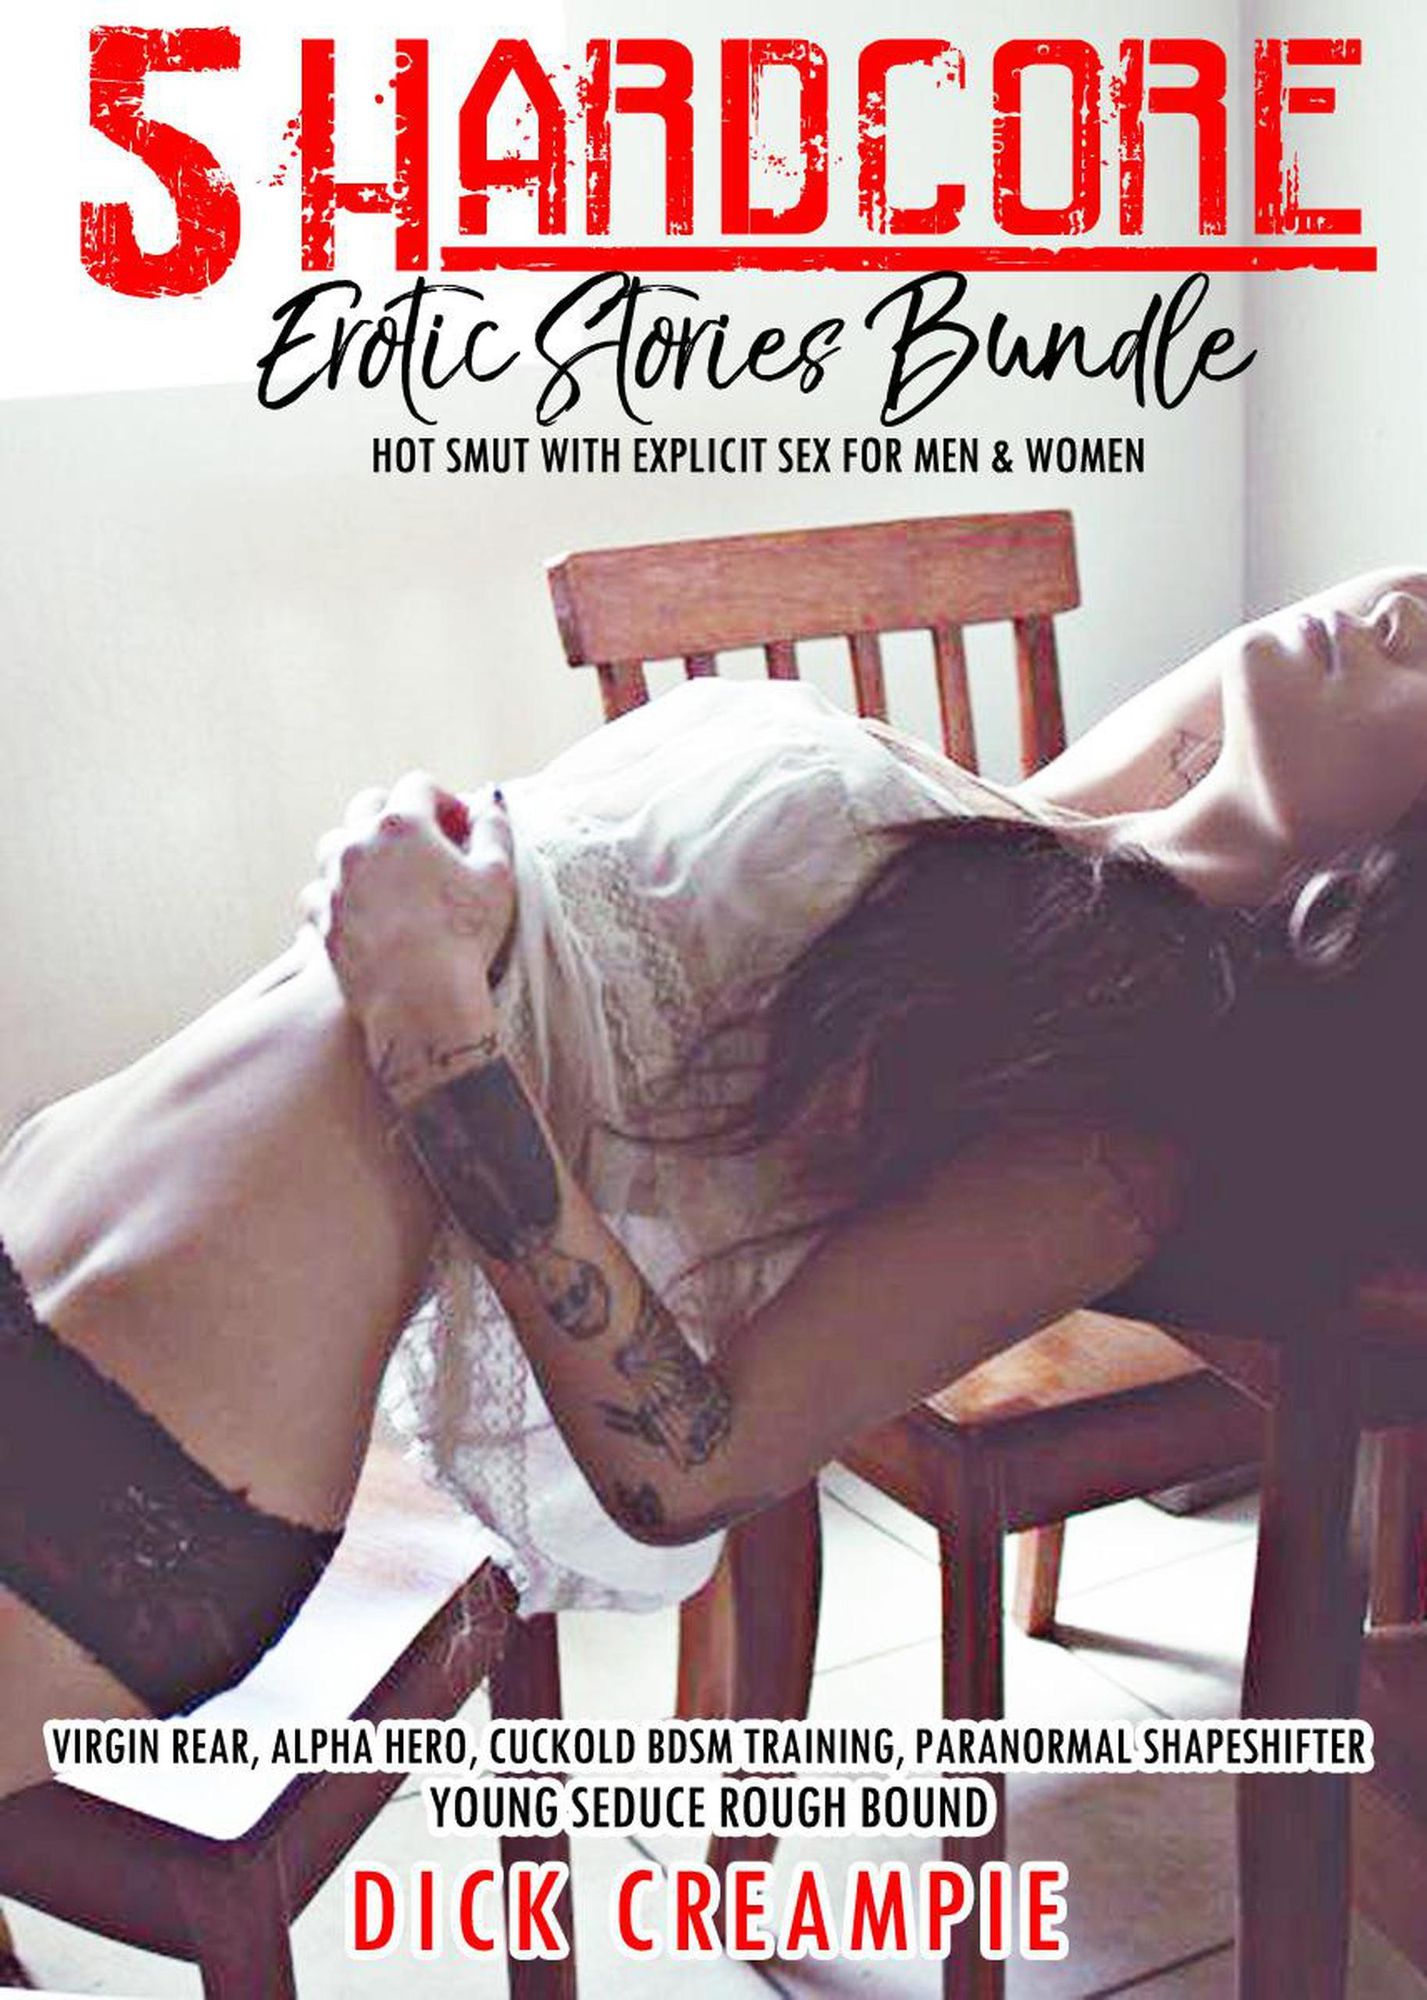 5 Hardcore Erotic Stories Bundle - Hot Smut with Explicit Sex for Men and Women - Virgin Rear, Alpha Hero, Cuckold BDSM Training, Paranormal Shapeshifte von Dick Creampie pic